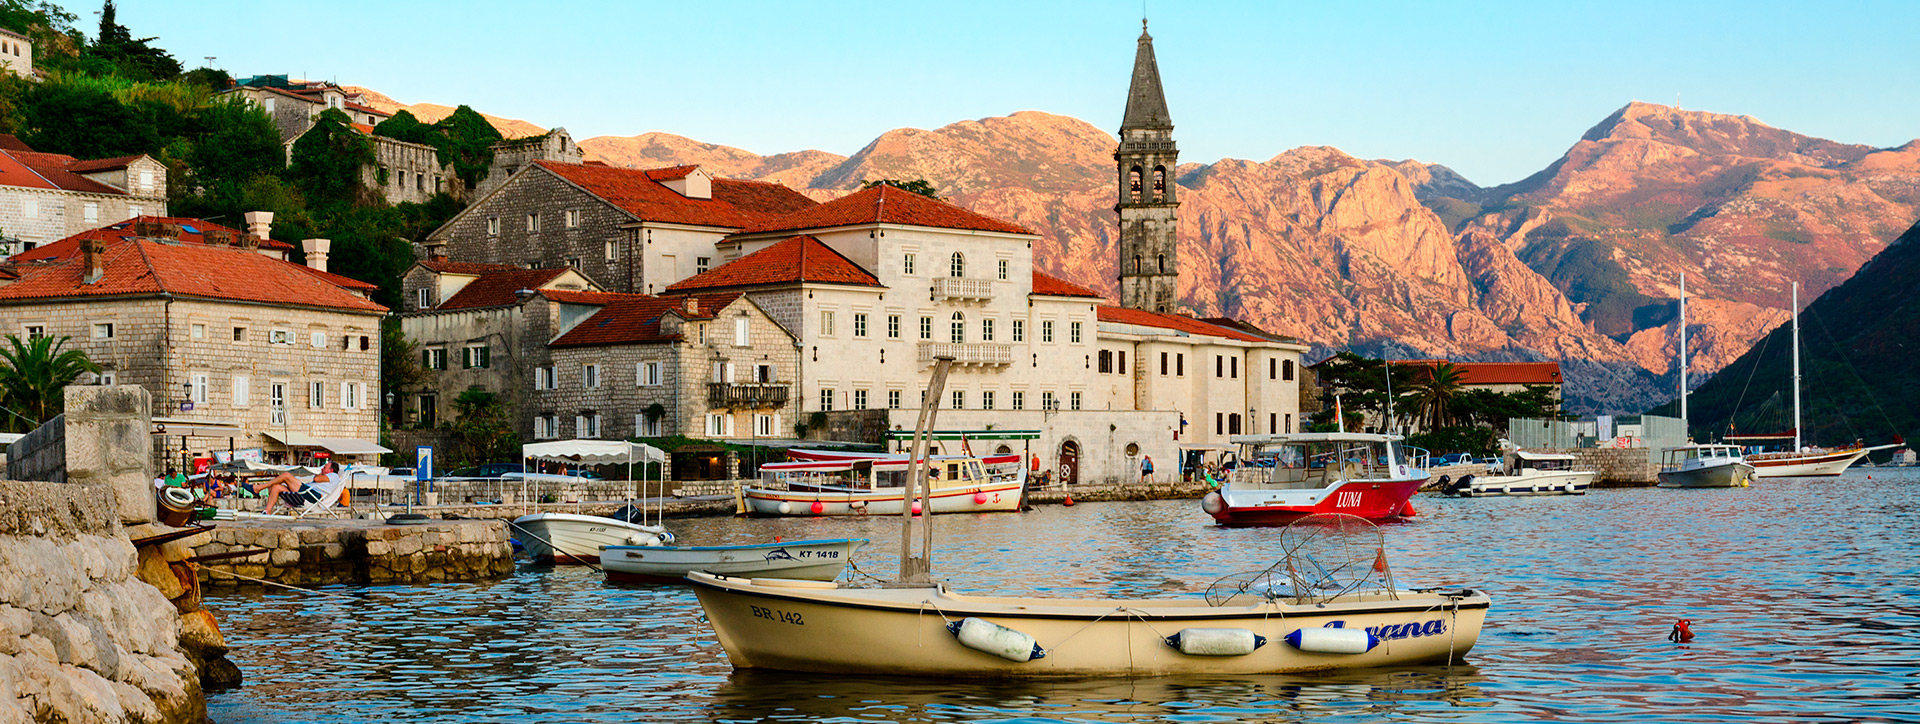 The waterfront in Perast, Montenegro